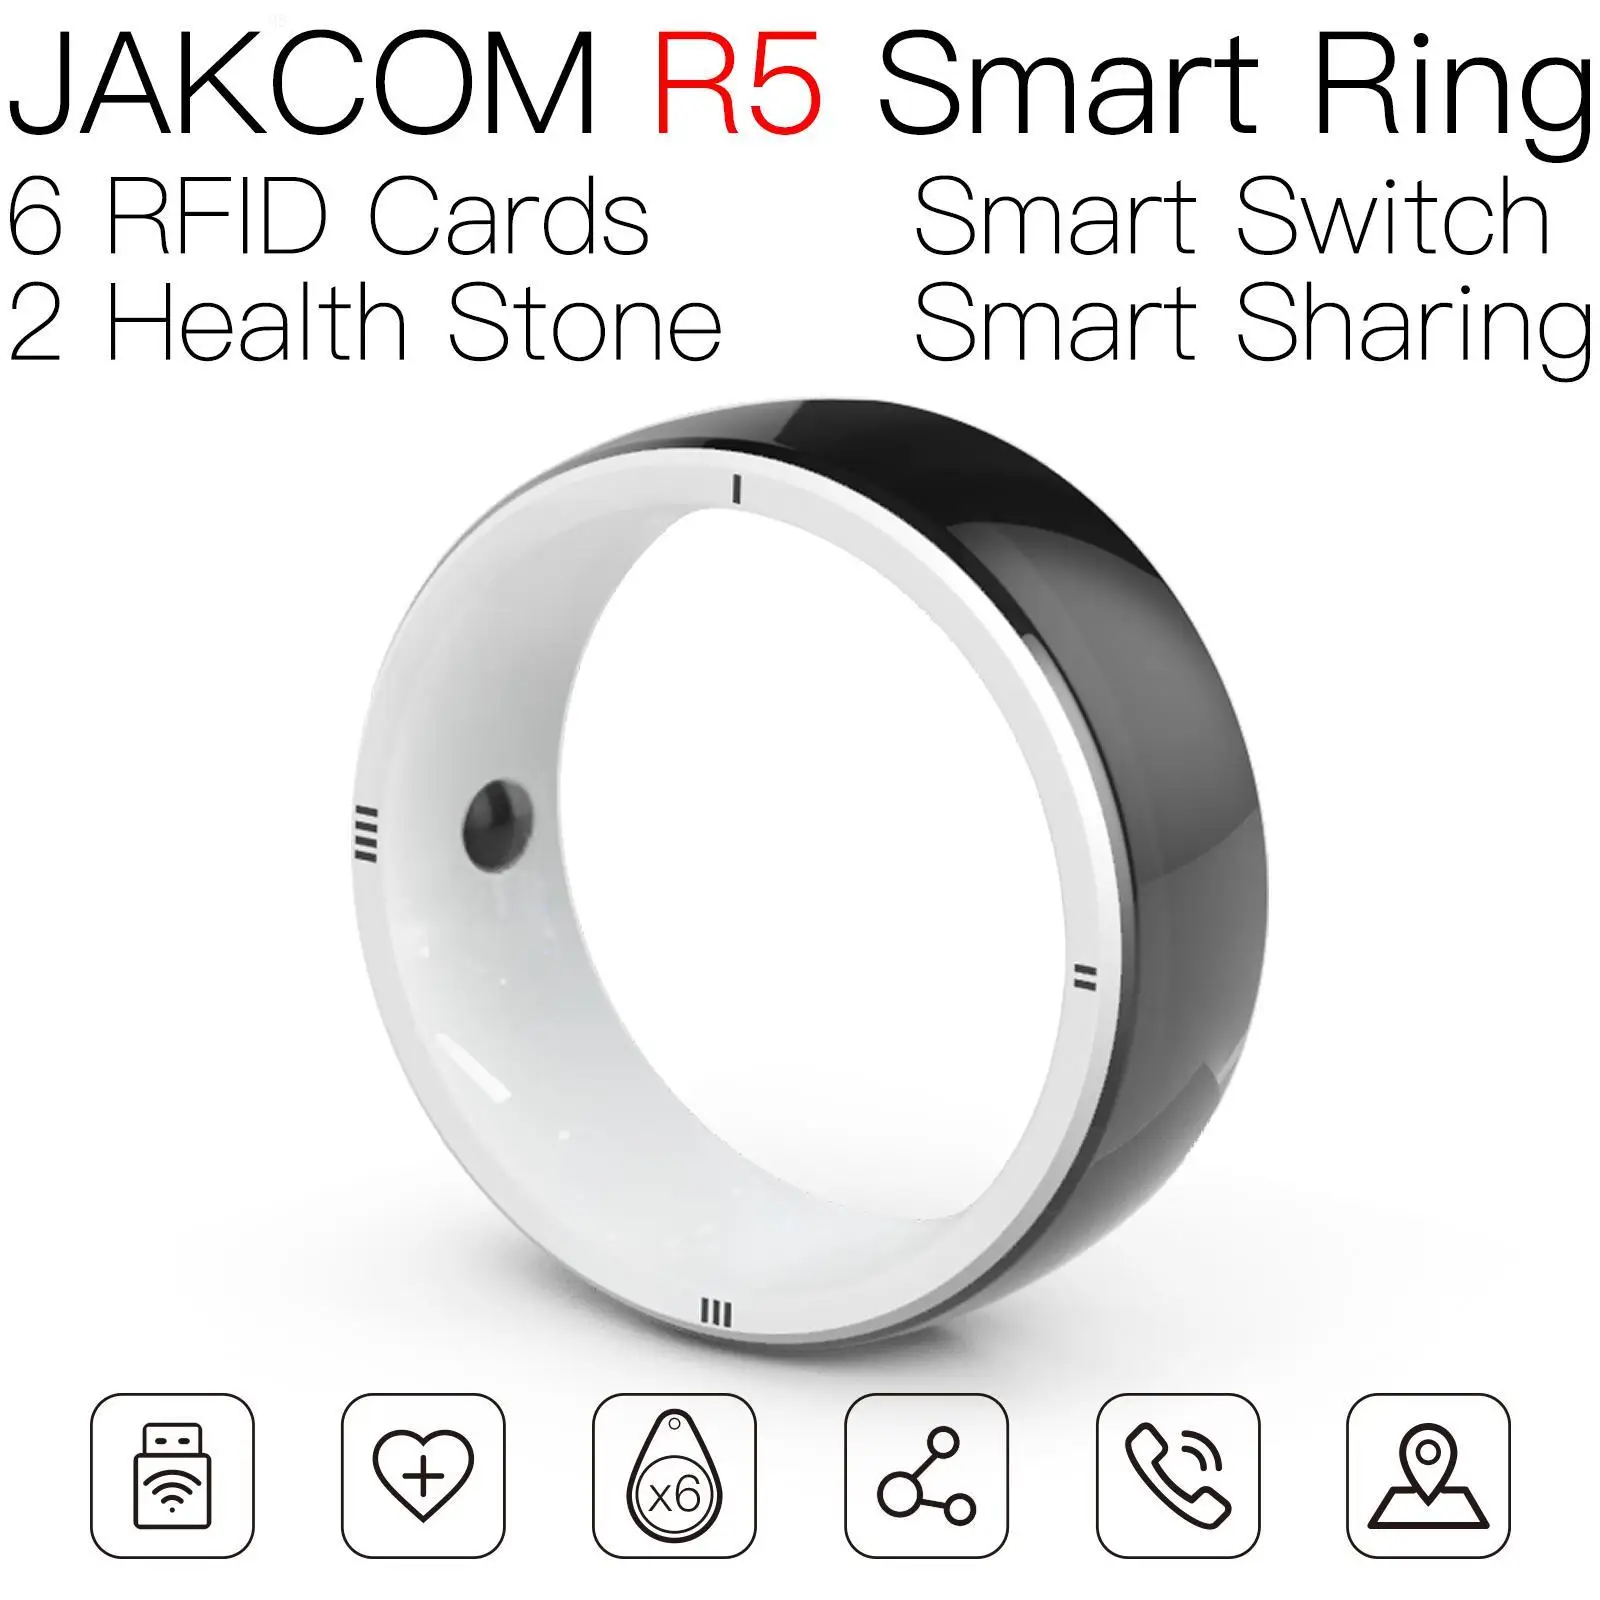 

JAKCOM R5 Smart Ring Best gift with smart mirror mi4 band hong kong goldway store kitchen smarth watch germany dt98 m5